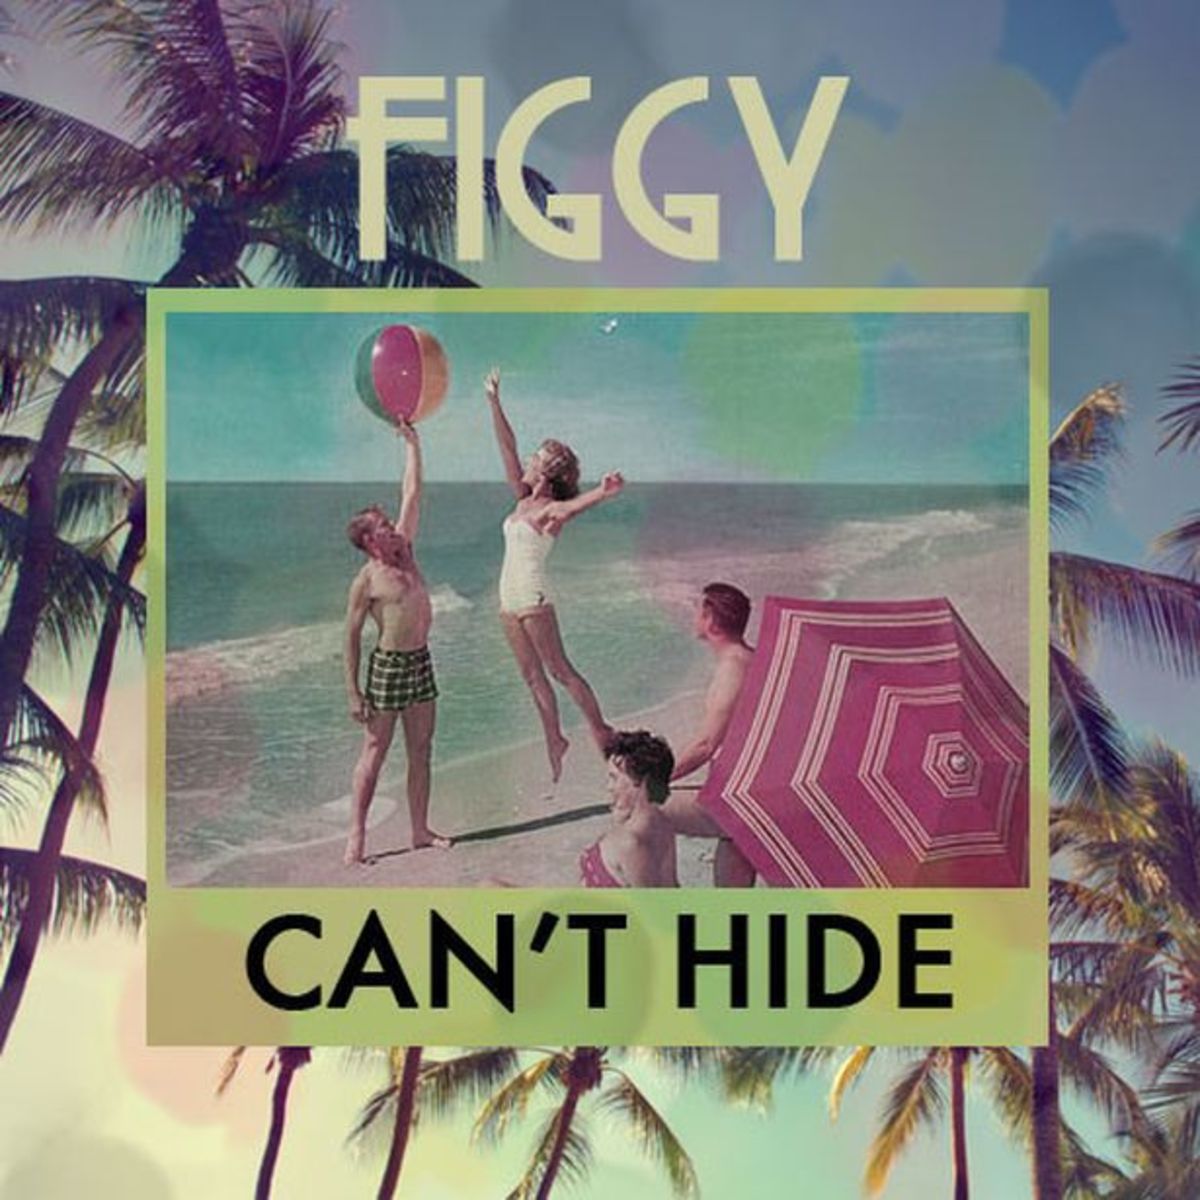 EDM DOWNLOAD: FIGGY - "CAN'T HIDE", File Under Summer Jams With A 90s Vibe